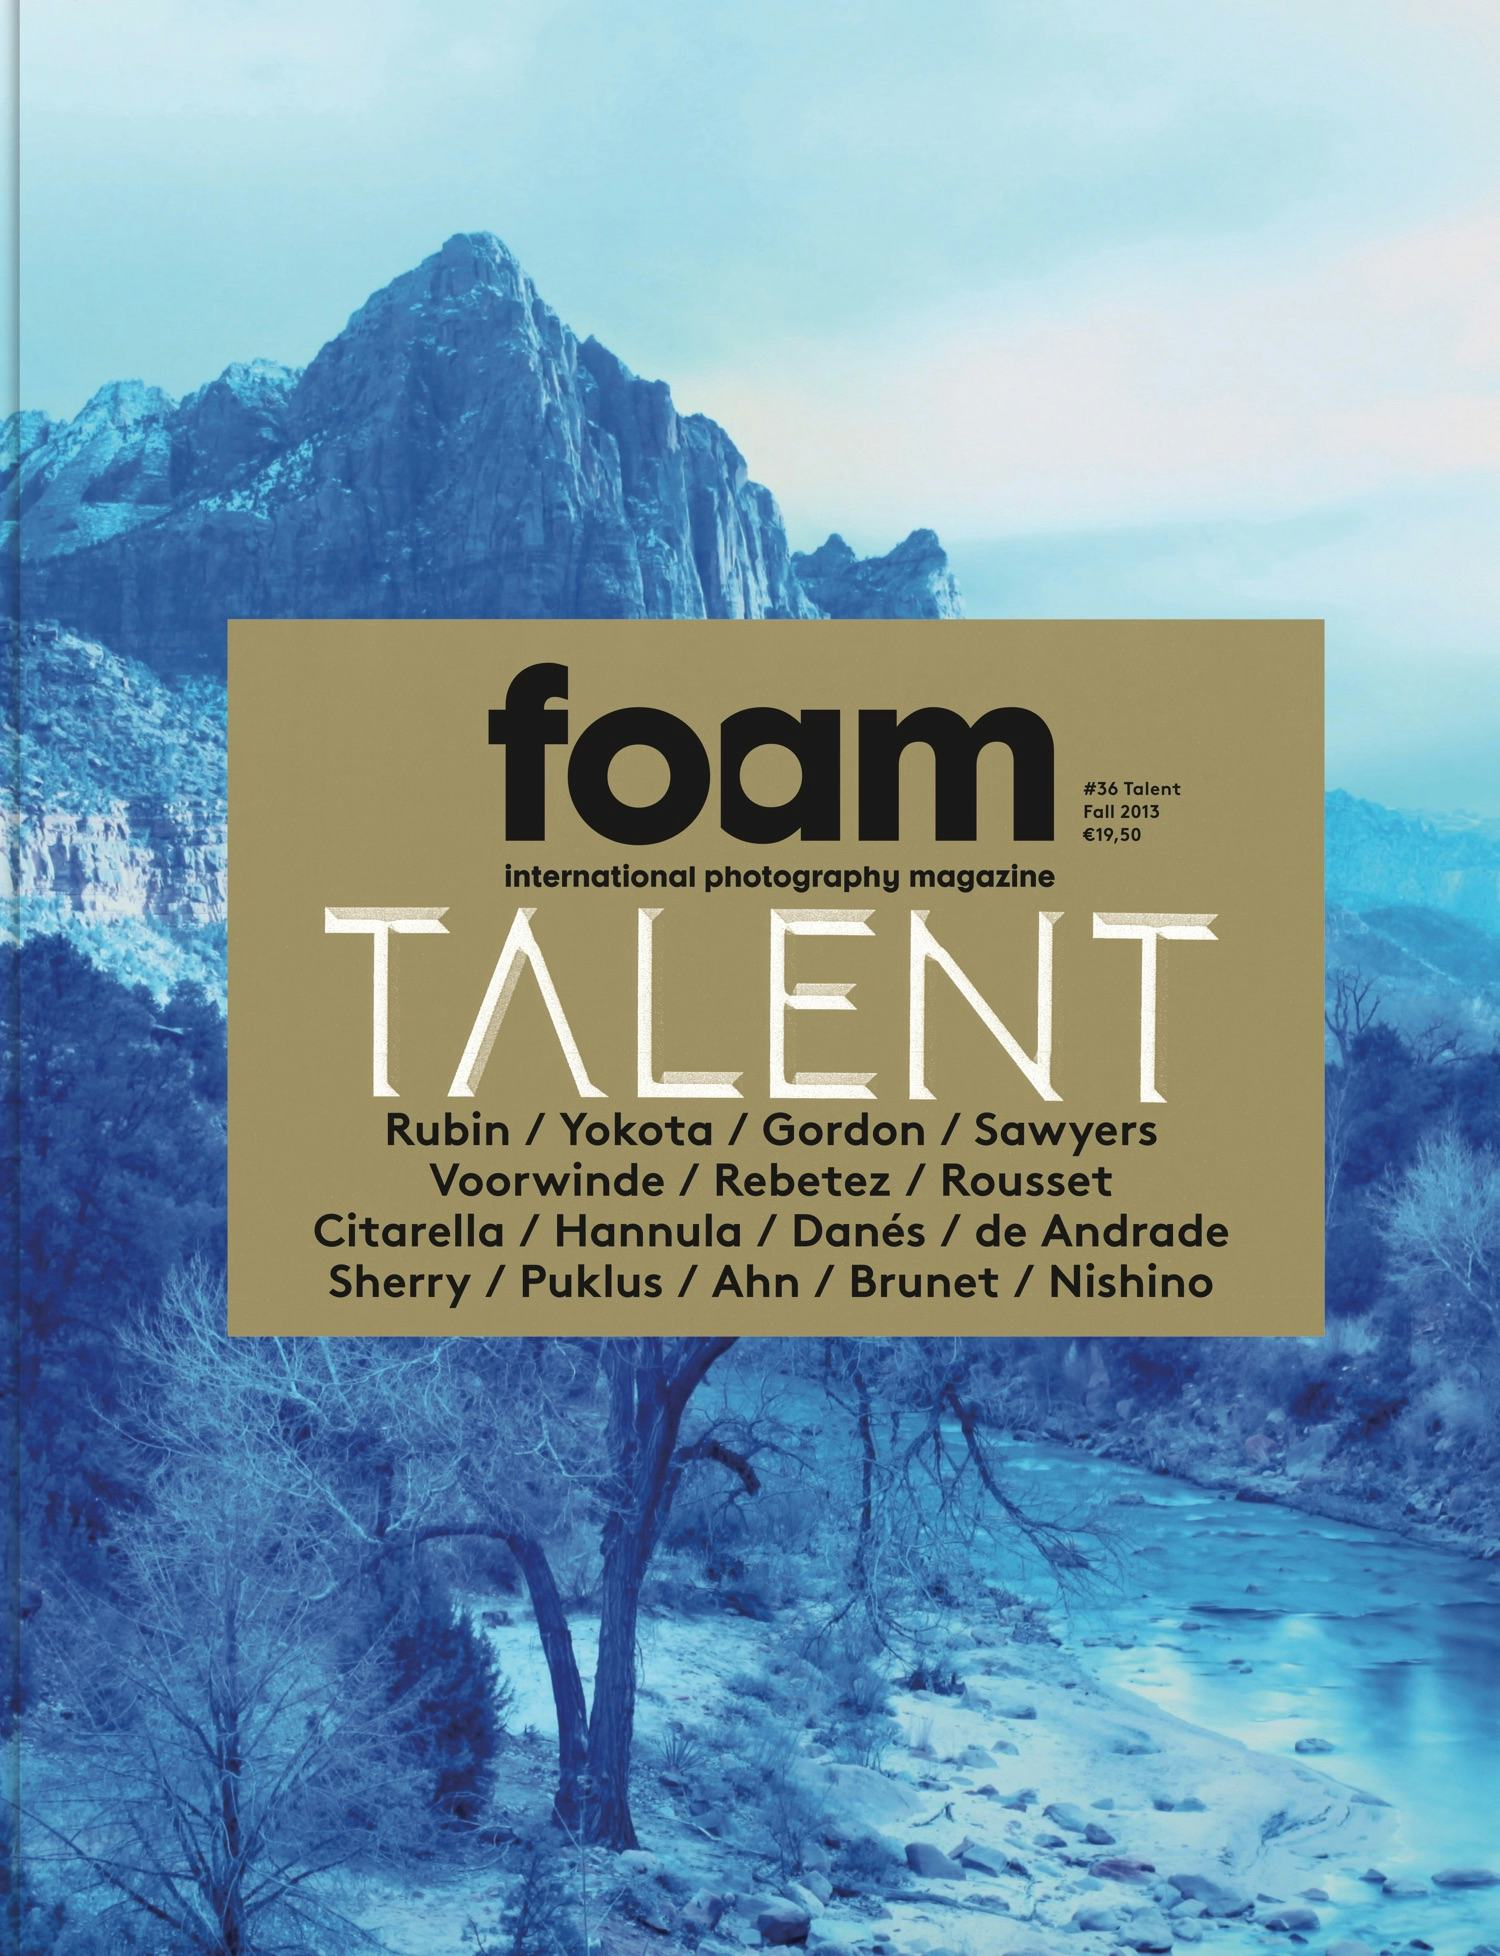 Cover of Foam Magazine #36: Talent showing a blue image of river and mountains.